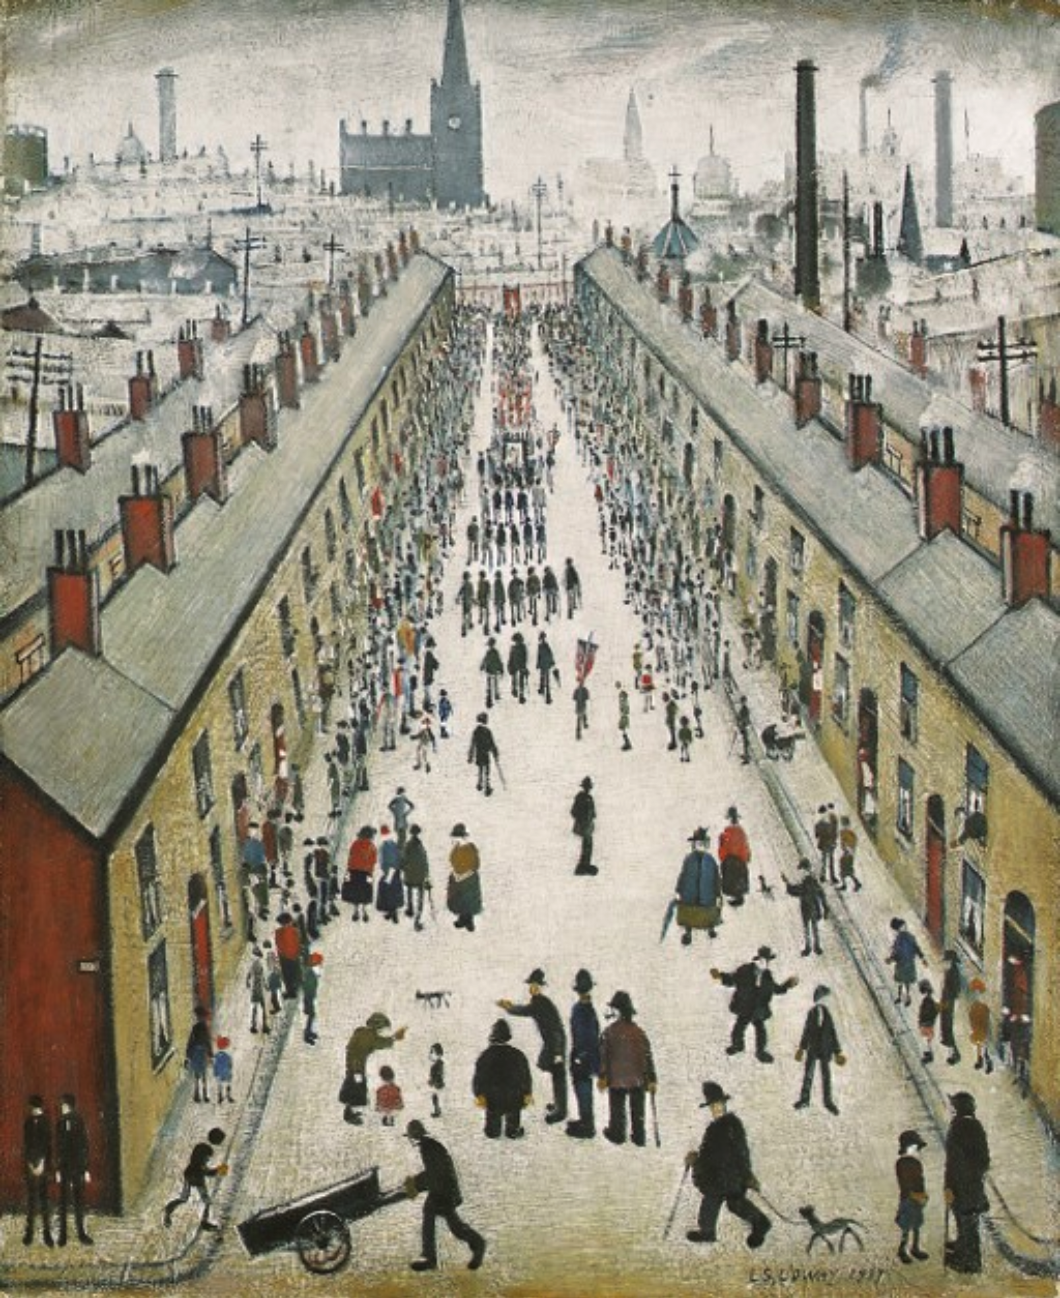 The procession (1937) by Laurence Stephen Lowry (1887 - 1976), English artist.